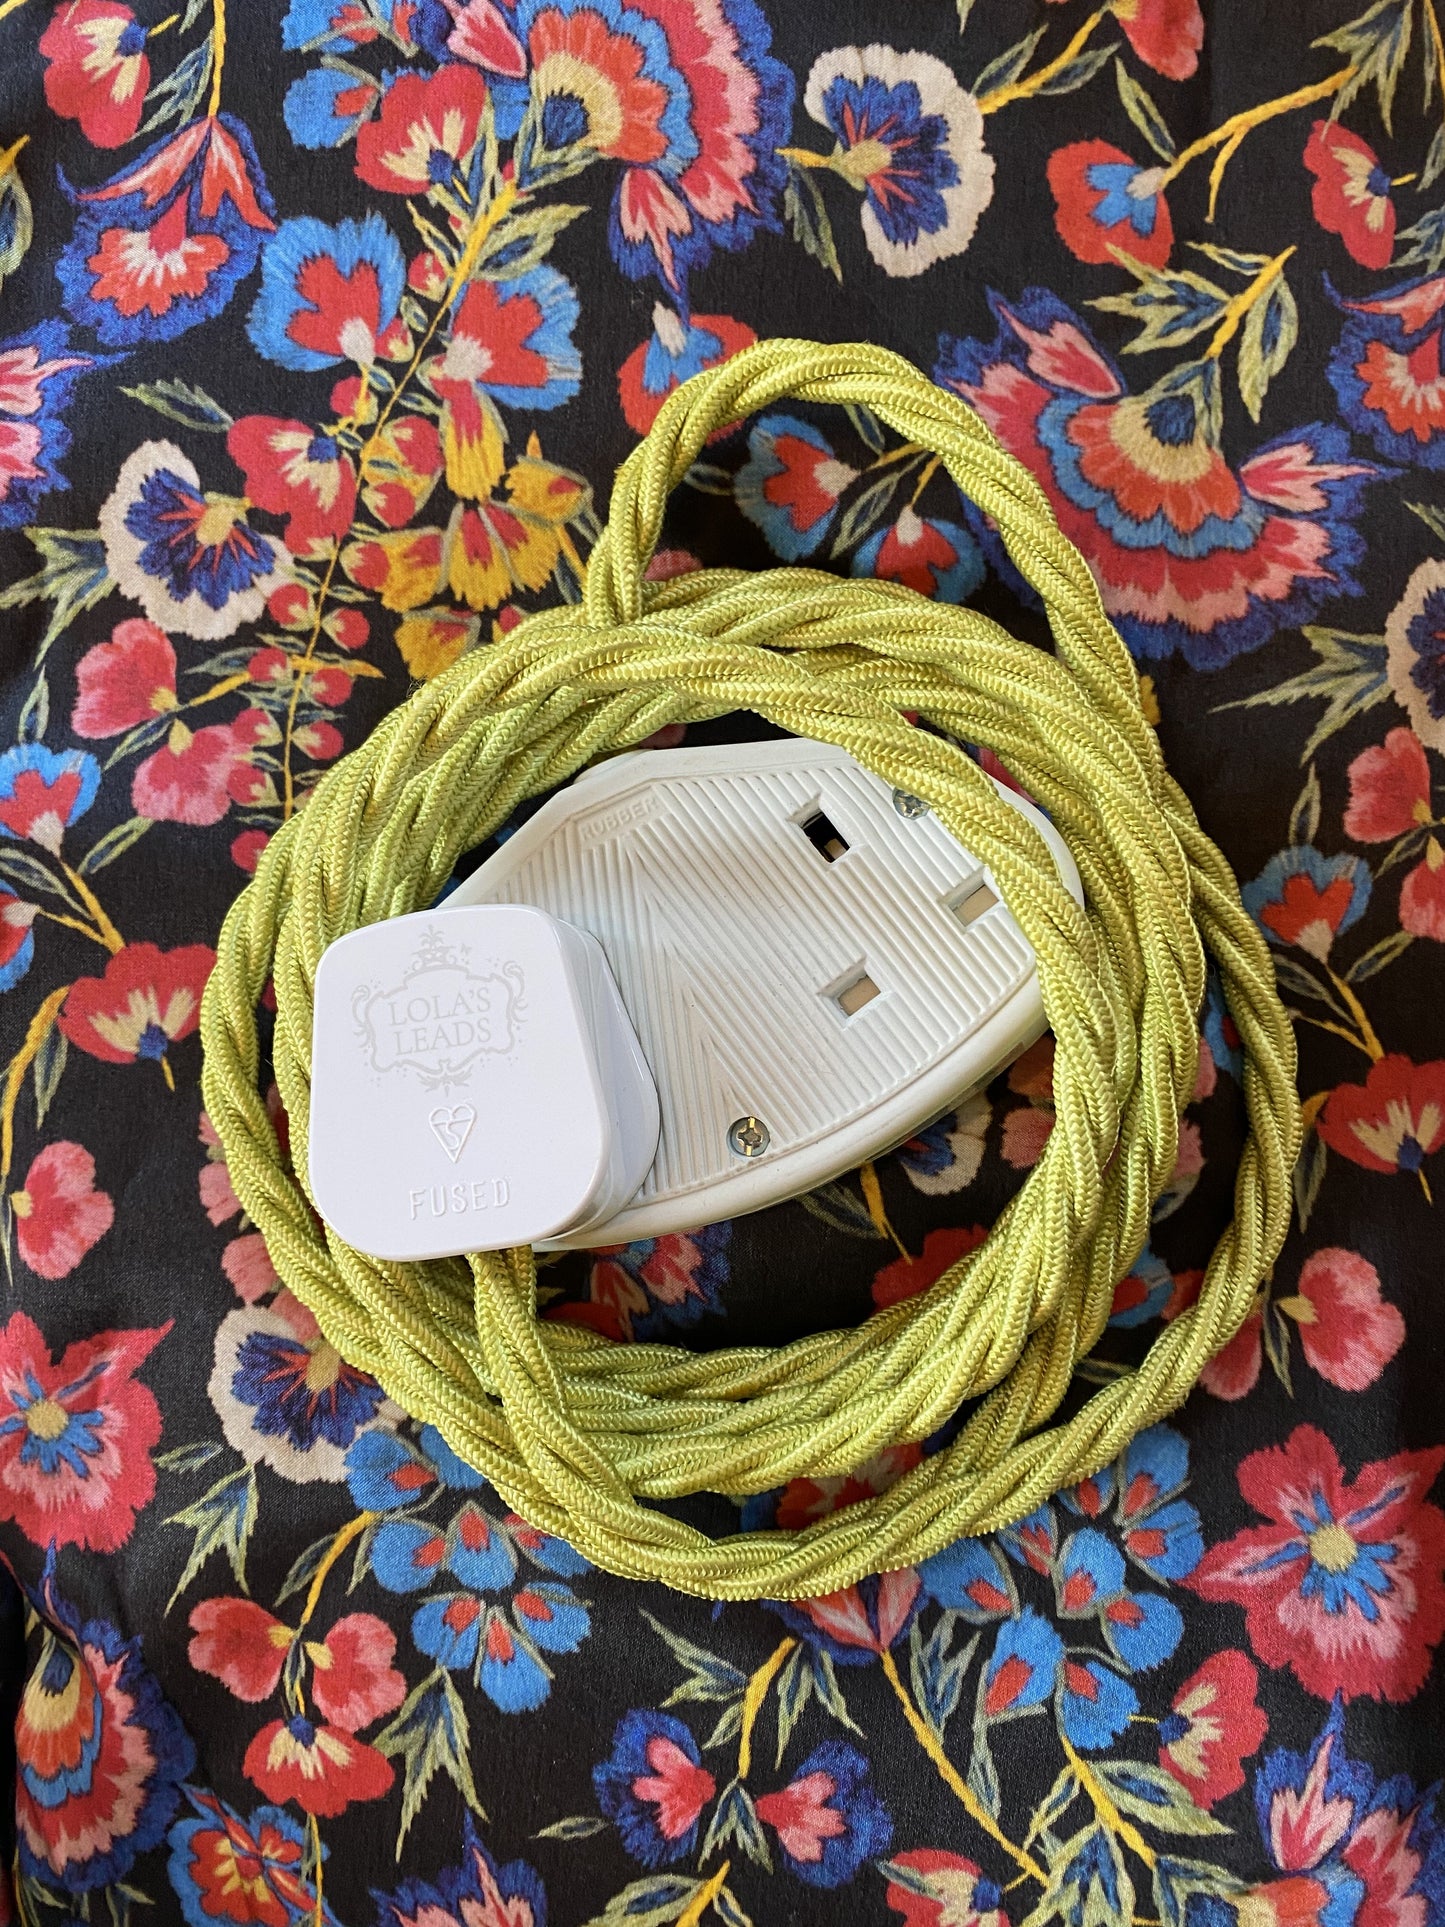 Lola's Leads - Chartreuse & White 2m